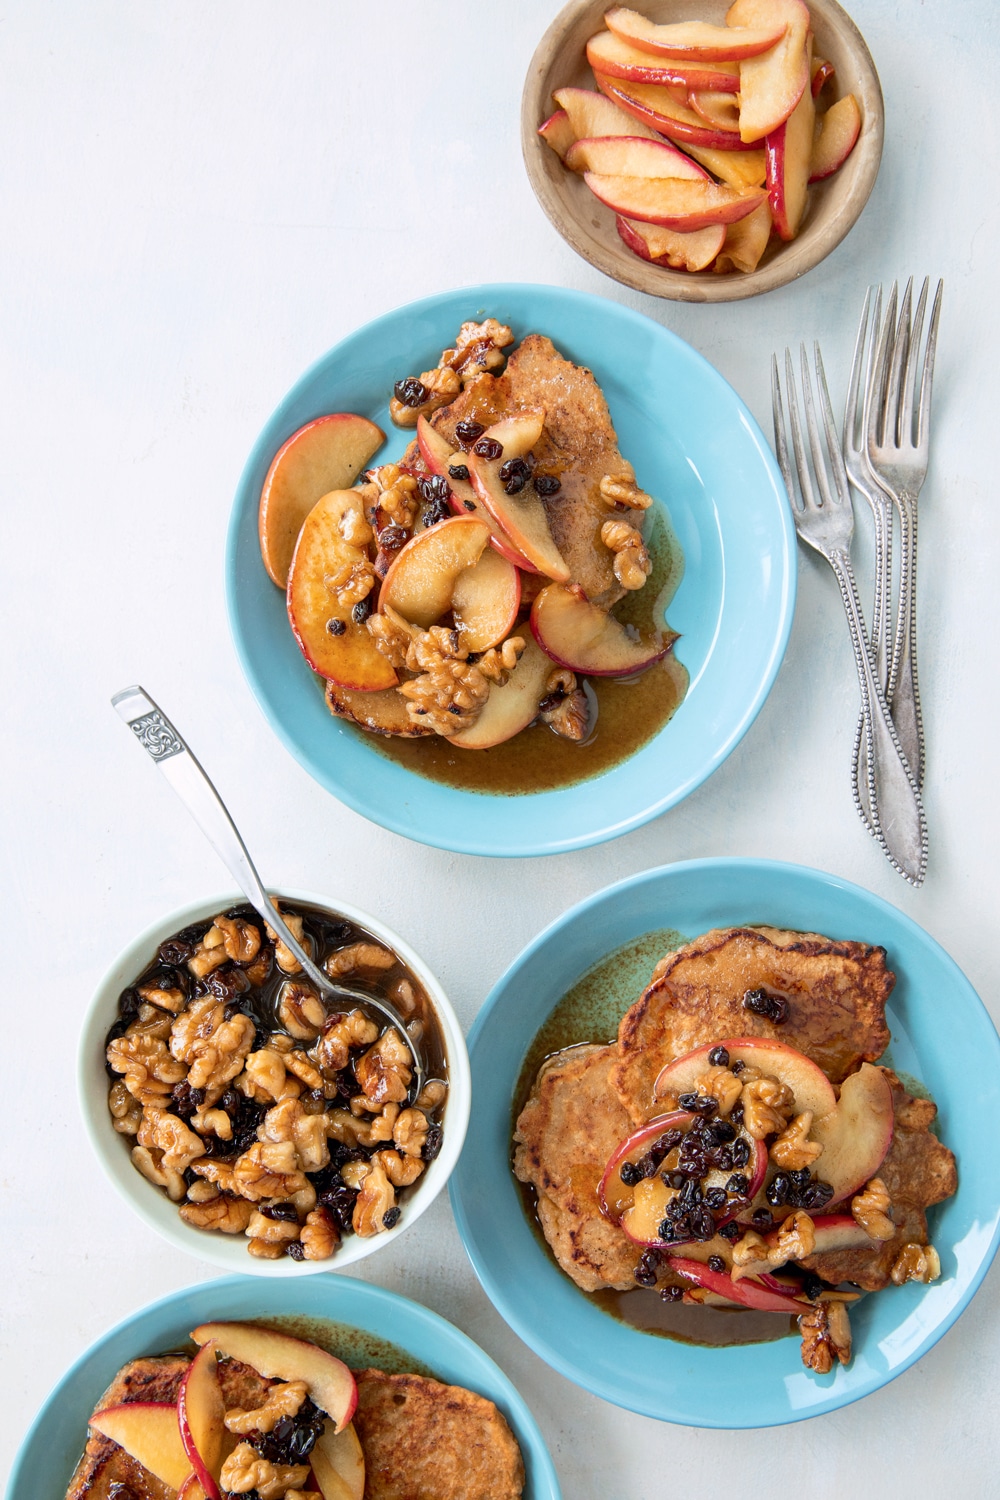 Apple Cider Pancakes with Walnut Compote Recipe